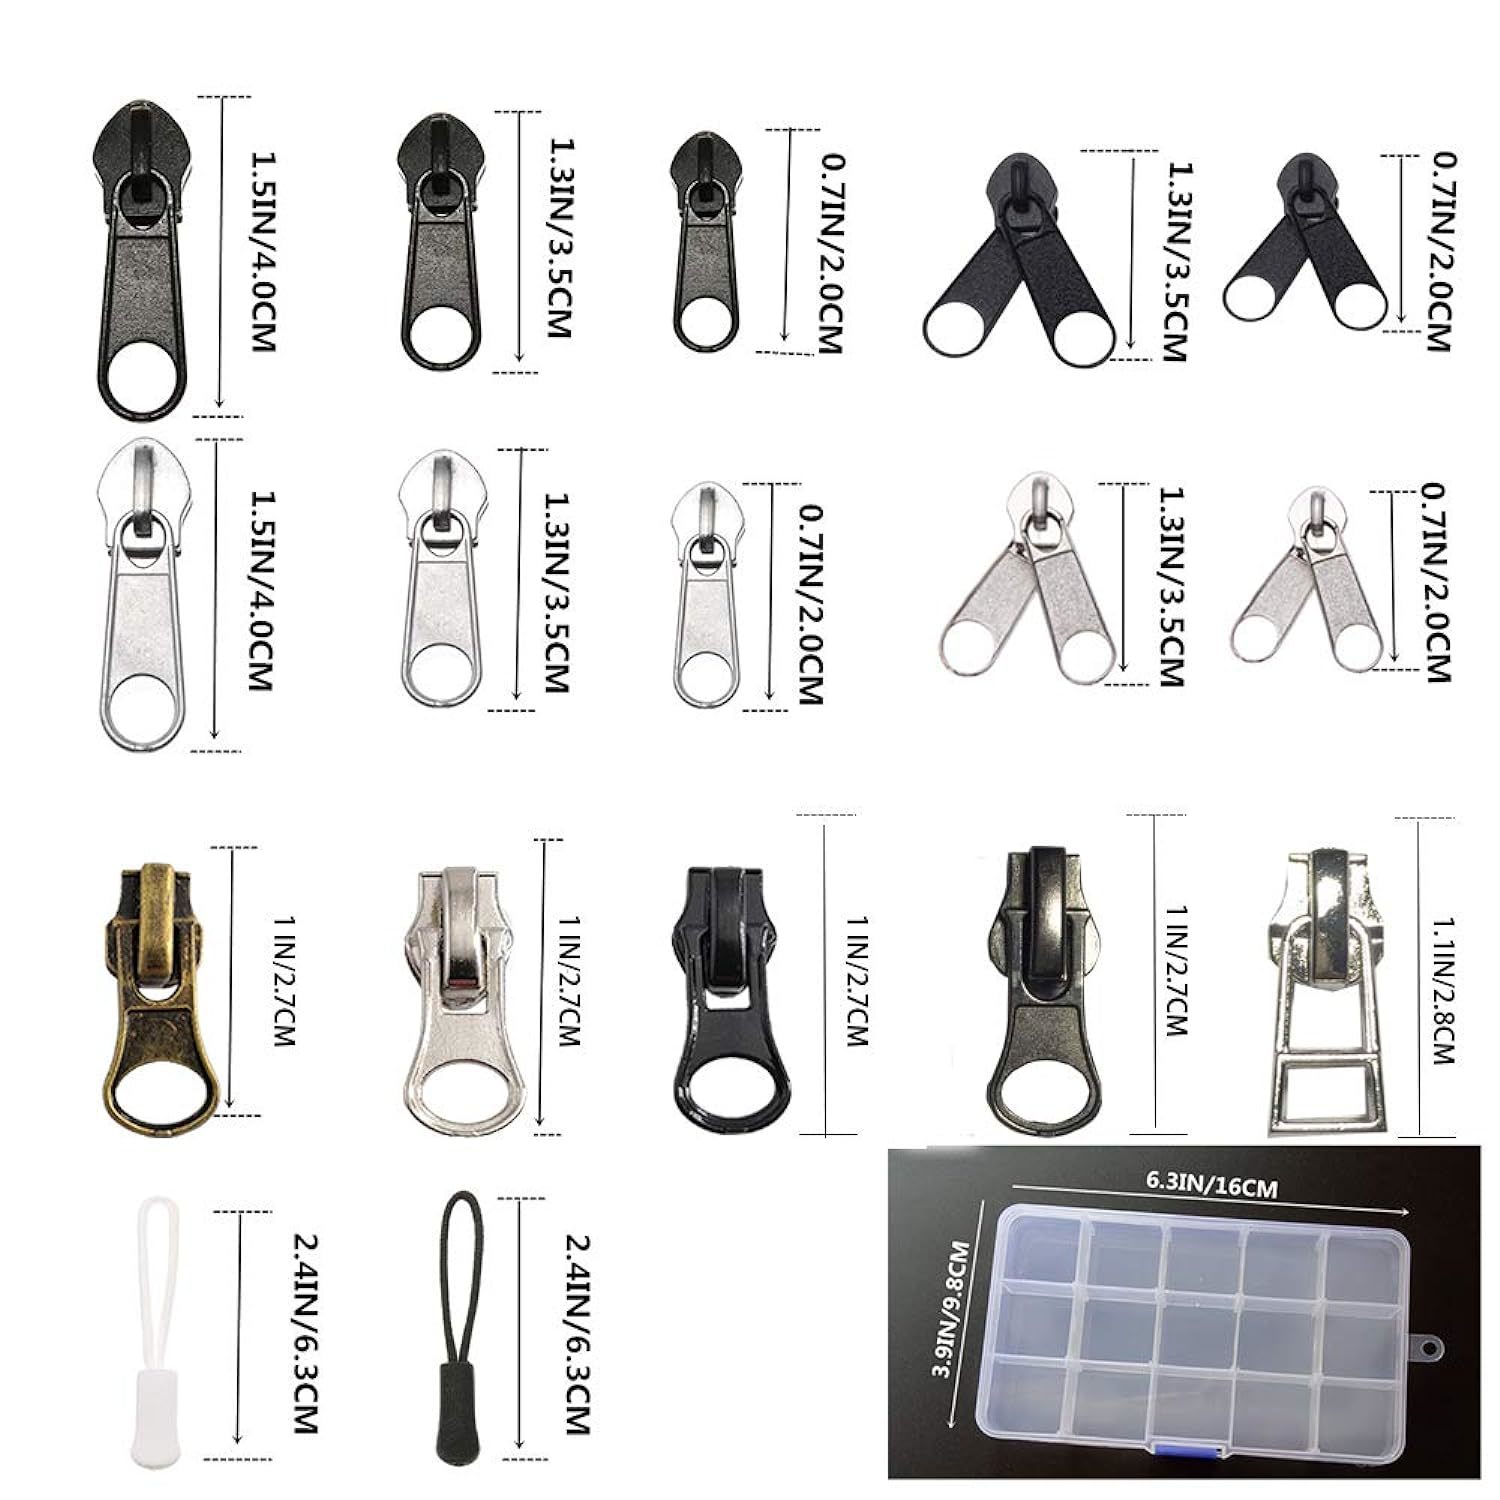  ZipperStop Wholesale - Zipper Repair Kit Solution 9 Sets YKK  Auto Lock Sliders Assorted 3 of #3, 2 of #5, 2 of #7 and 2 of #10 Included  Top & Bottom